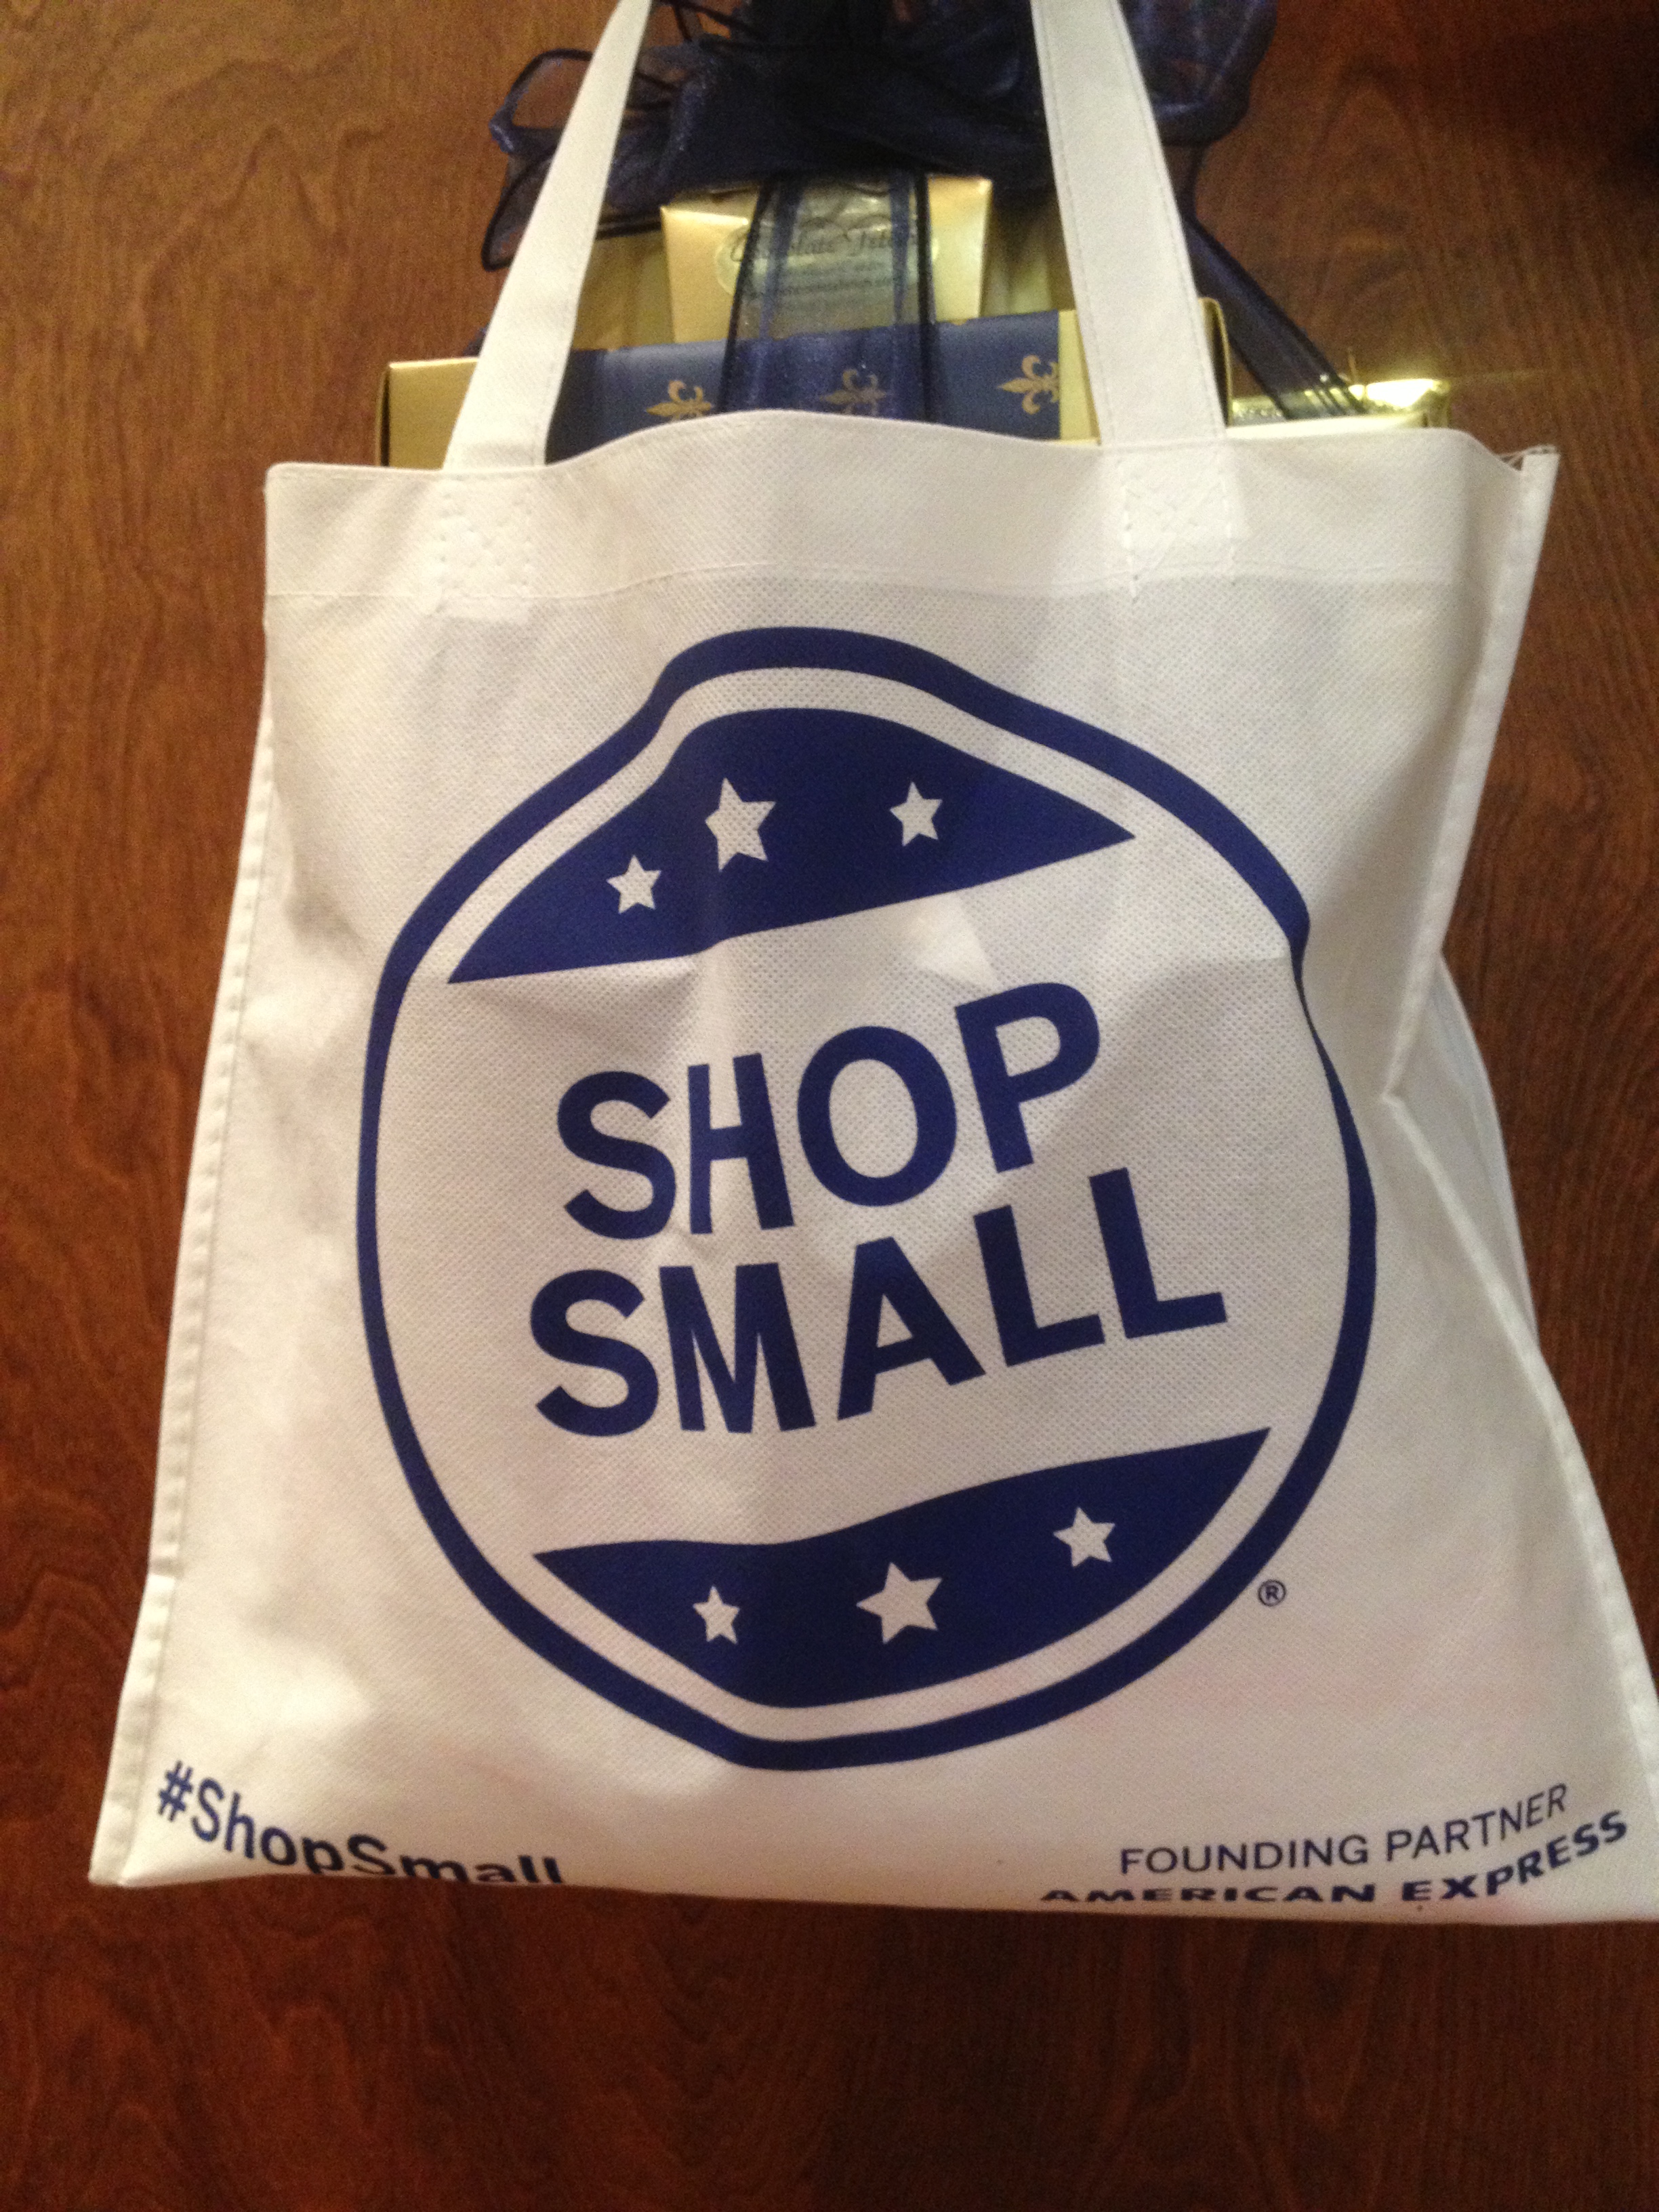 We're giving away 40 of these tote bags for FREE!  Read more to find out how to get yours.